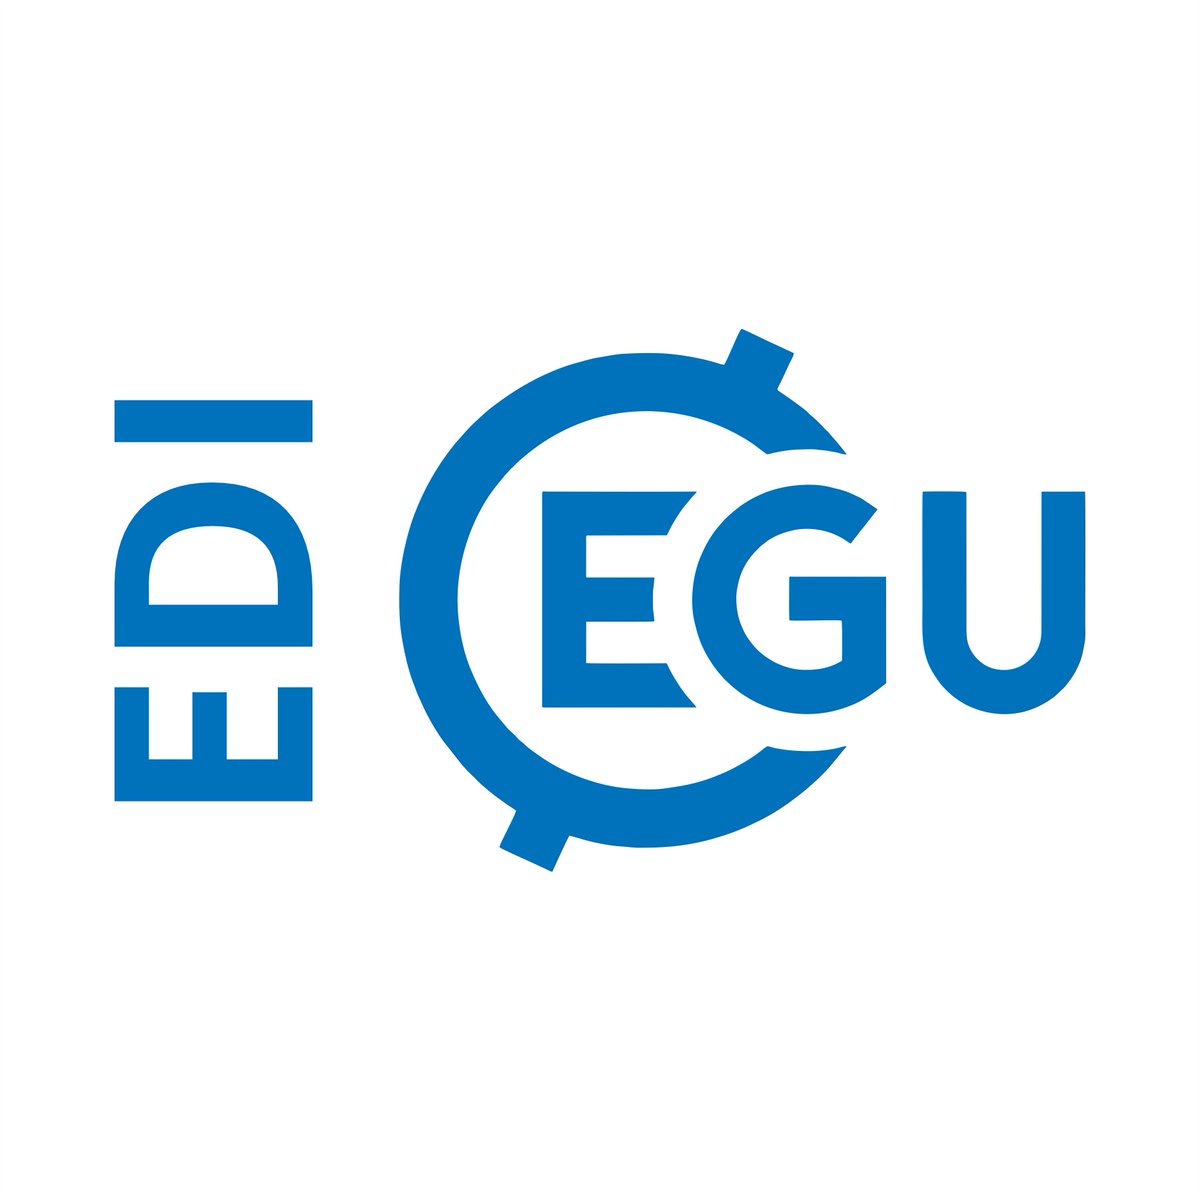 Did you know the EGU #Equality, #Diversity and #Inclusion (#EDI) Committee has a twitter account: @EGU_EDI Why not follow them, or sign up to the mailing list to keep up to date with all our activities 👉 Members: egu.eu/8OSBYS/ Non-members : egu.eu/09GGBI/